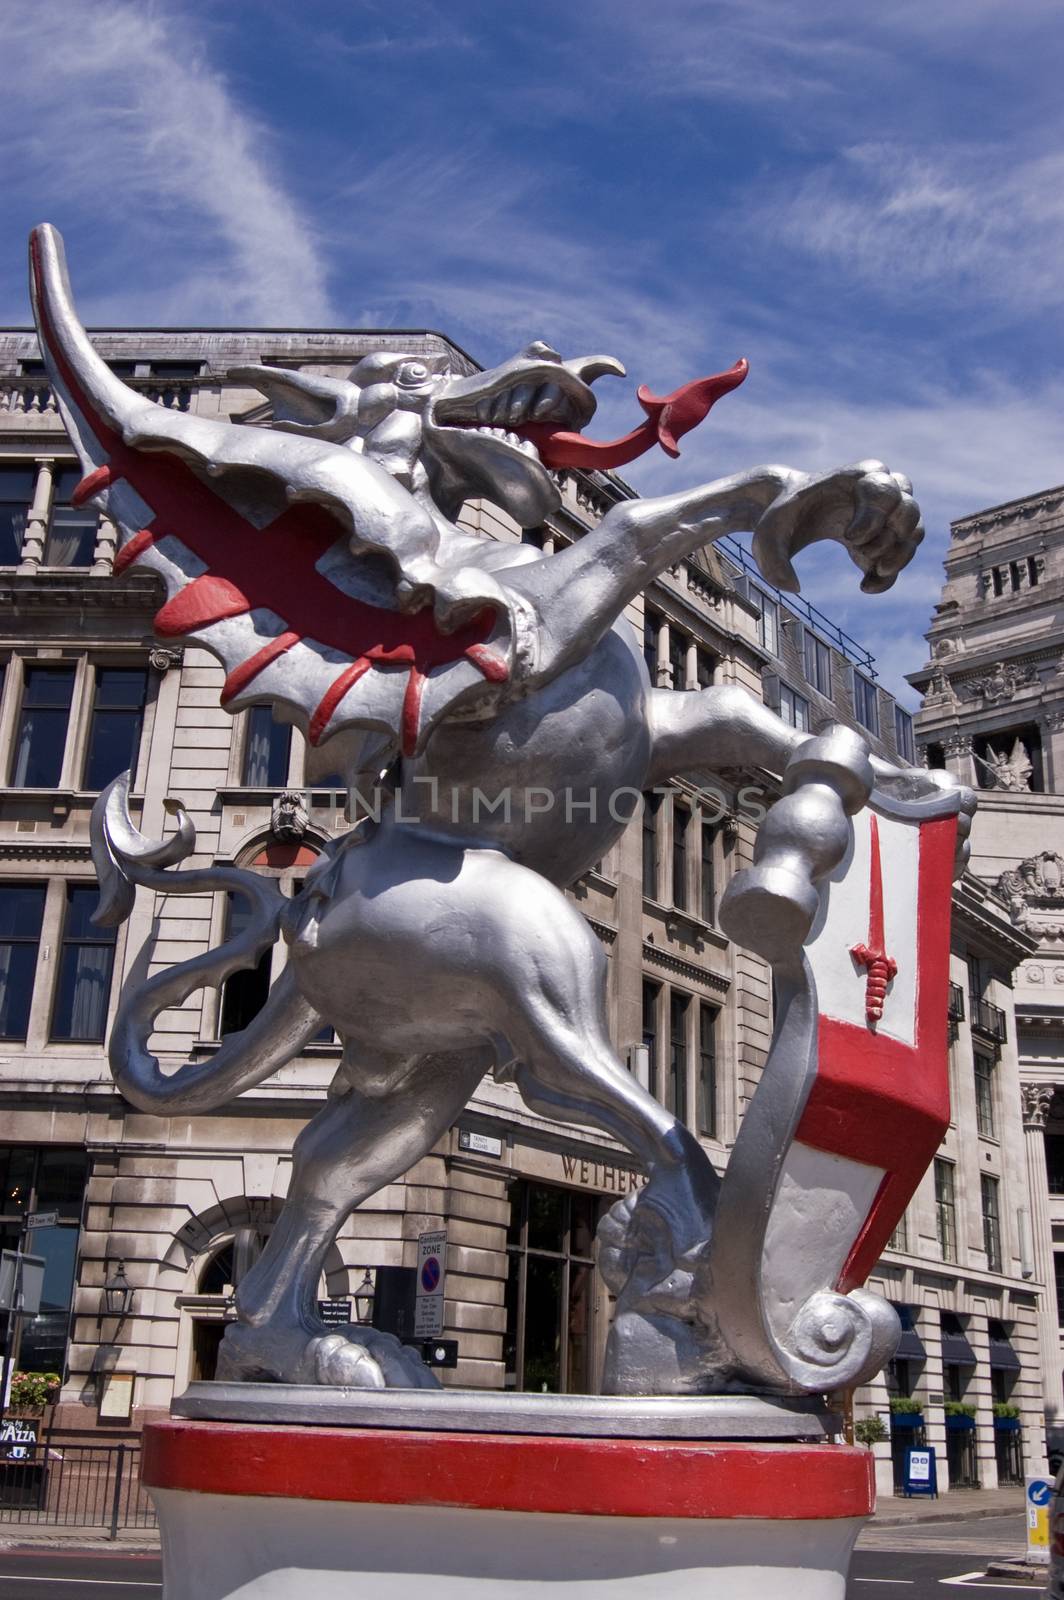 A dragon holding a shield of St George at one of the entrances to the City of London. Public monument on public display for over 50 years.